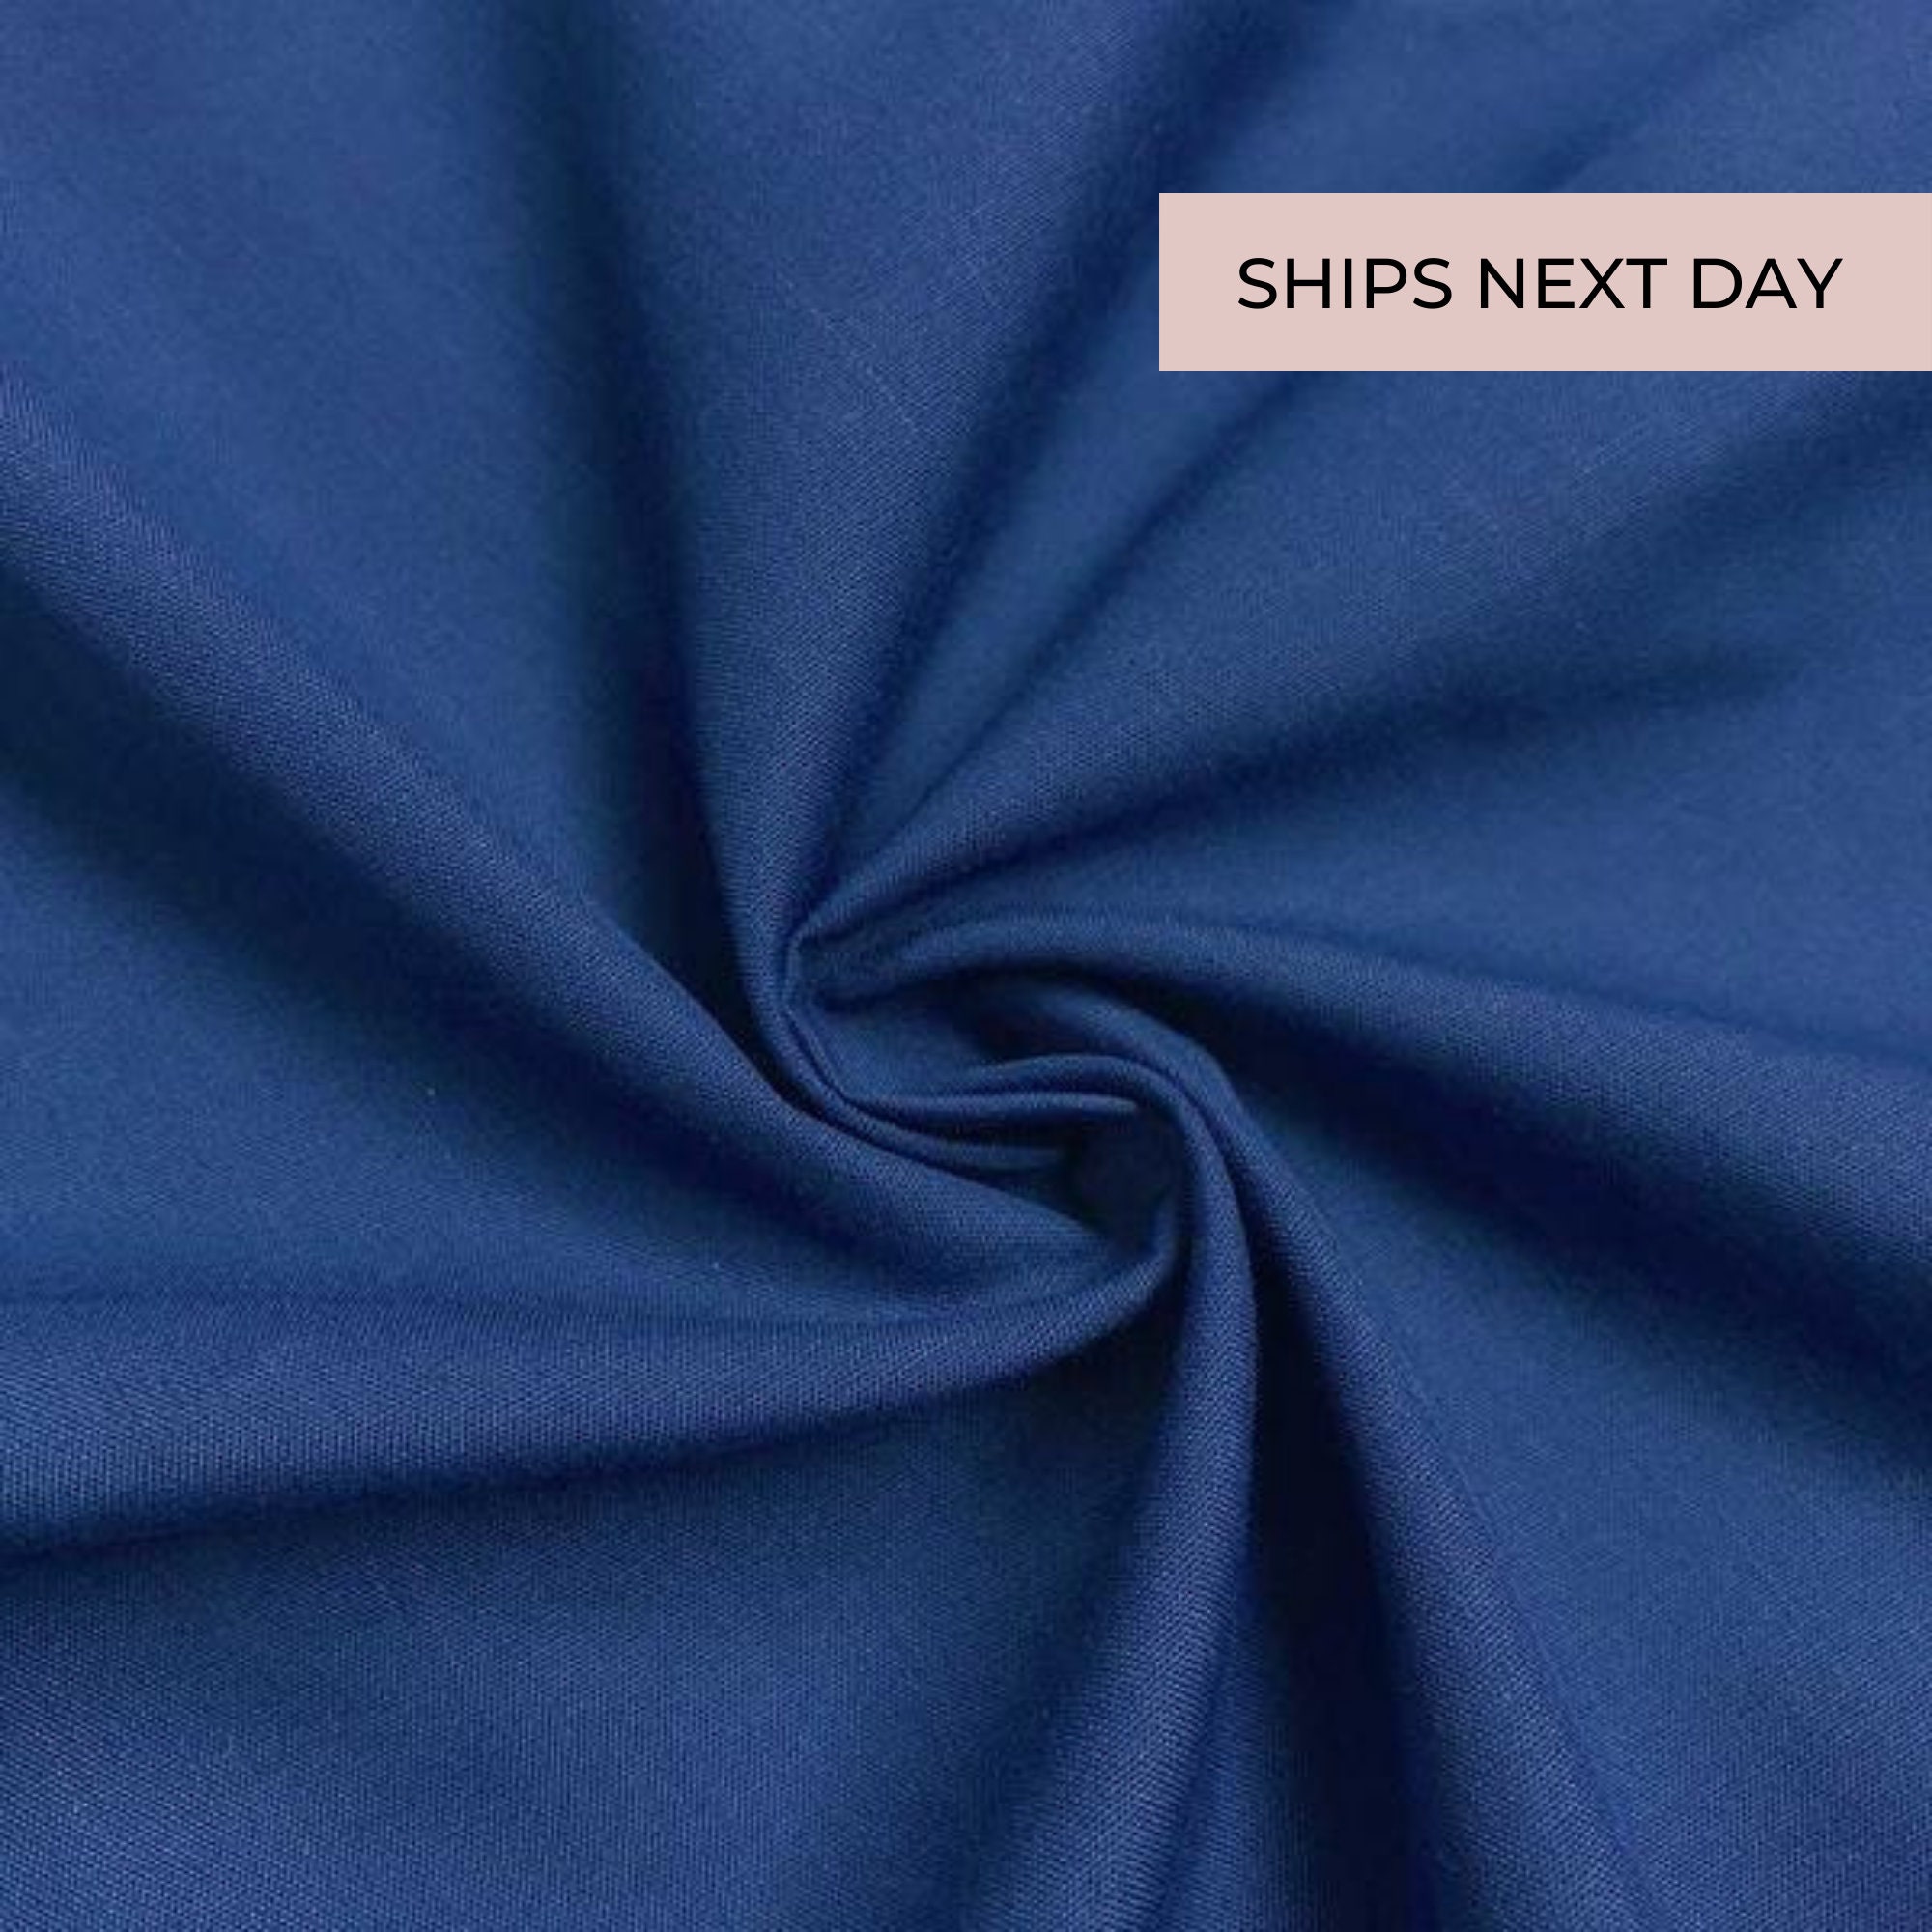 58-60 Blue Versace Satin Fabric, For Garments, GSM: 100-150